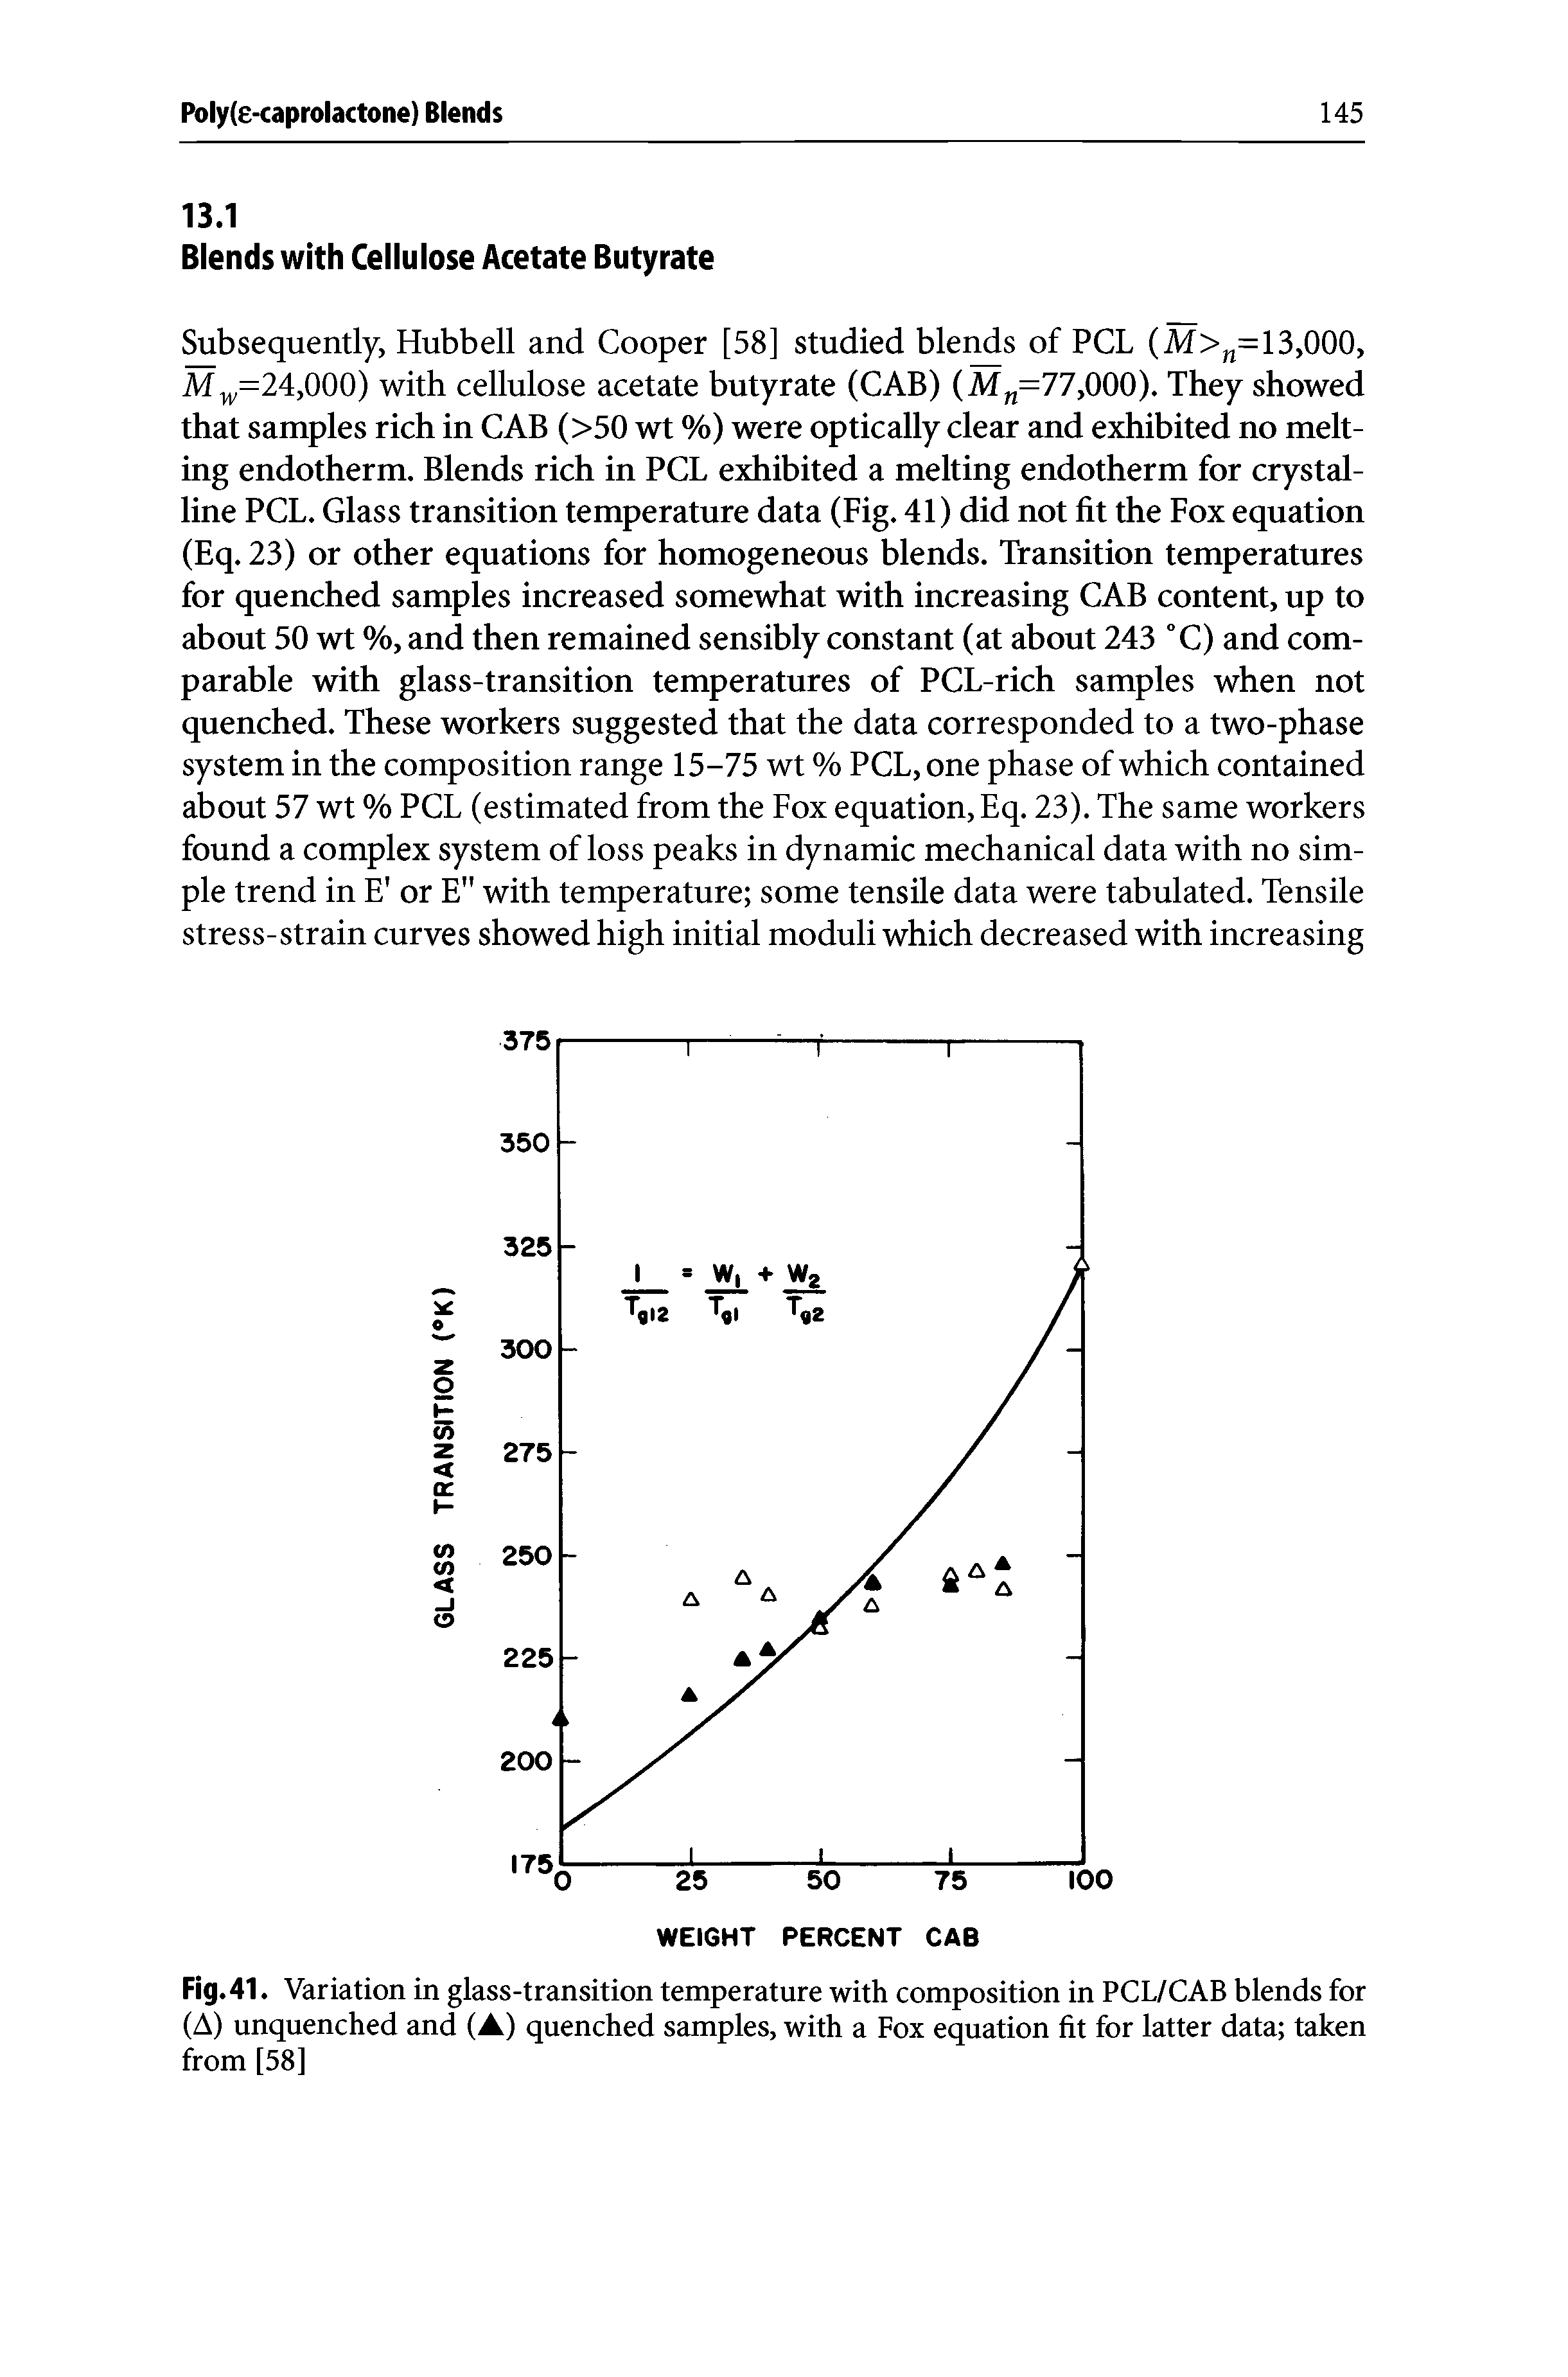 Fig. 41. Variation in glass-transition temperature with composition in PCL/CAB blends for (A) unquenched and (A) quenched samples, with a Fox equation fit for latter data taken from [58]...